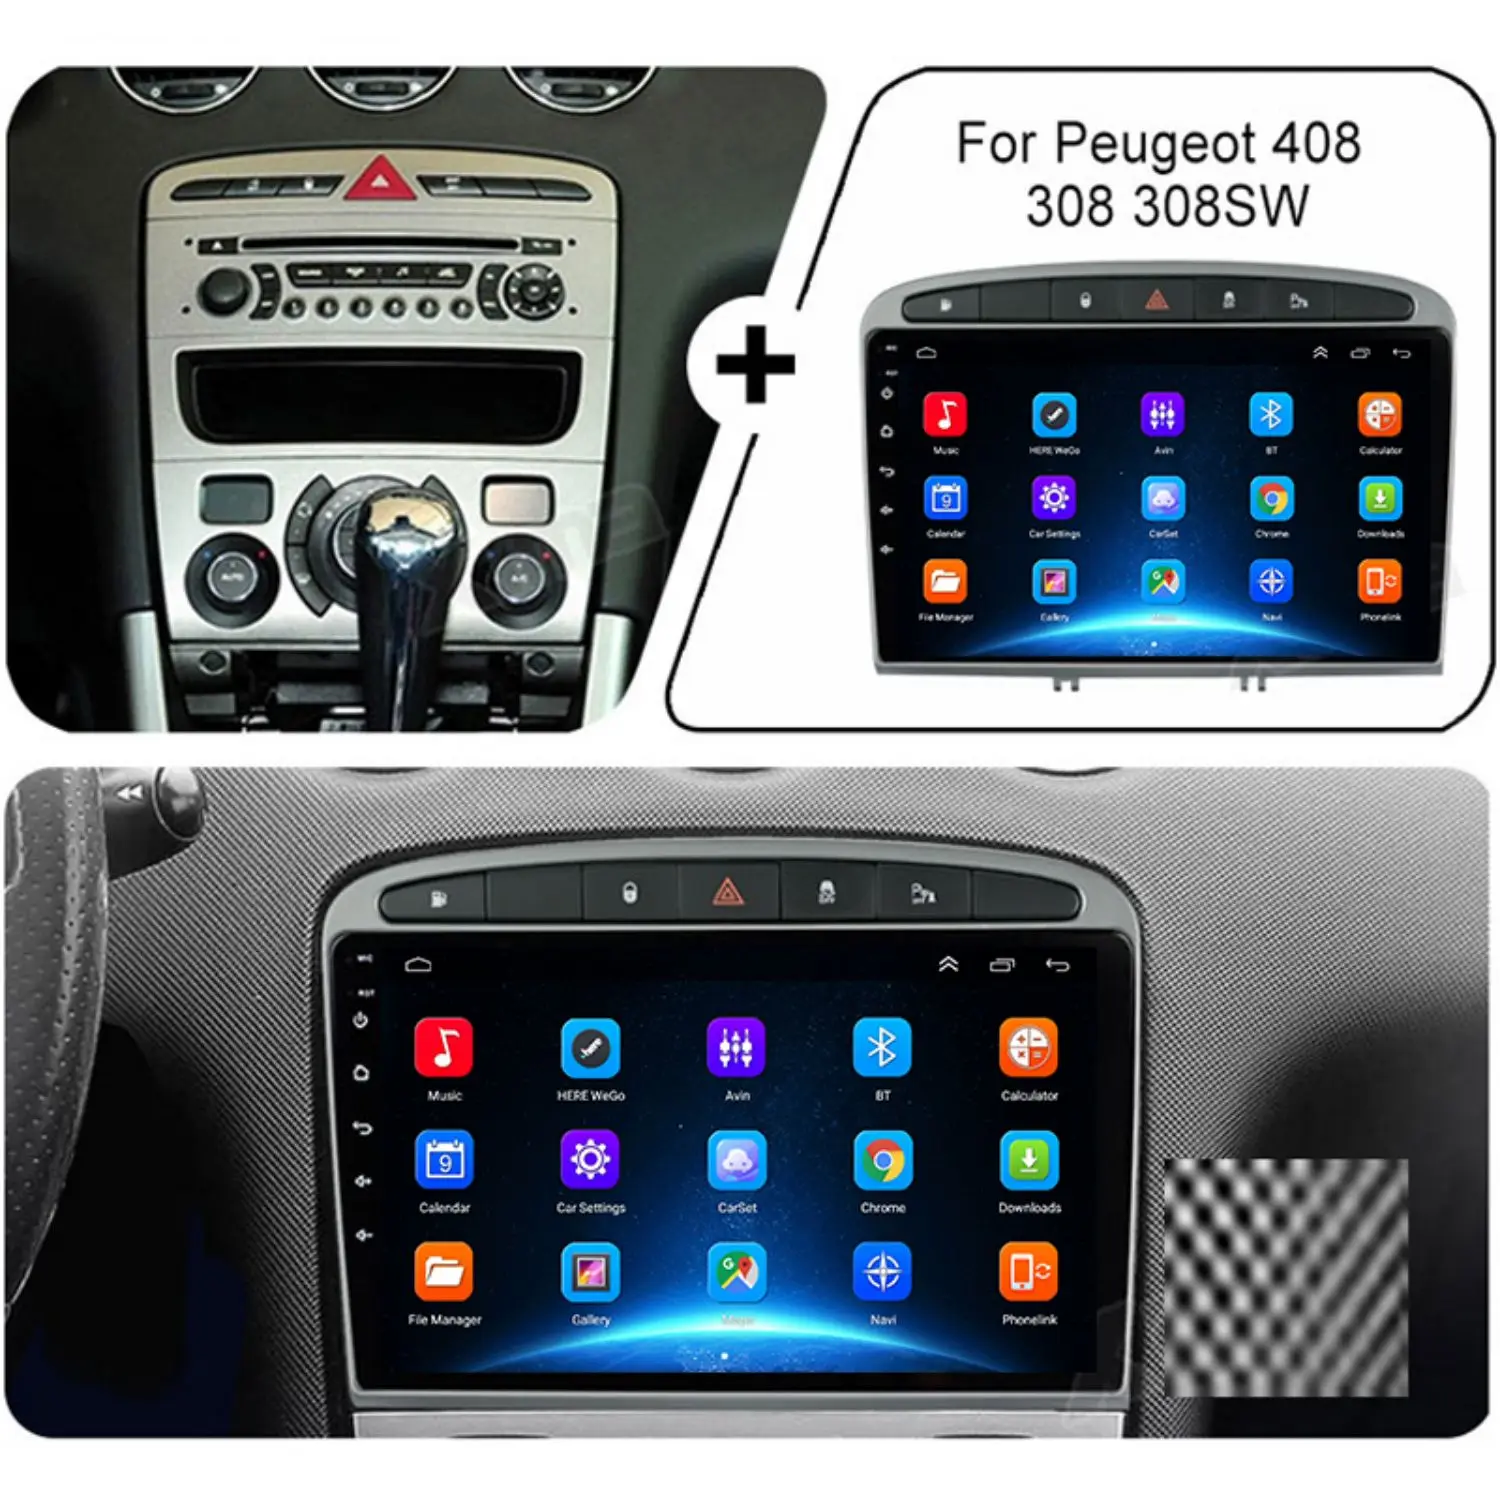 Android Radio de Coche Multimedia para Peugeot 408 para Peugeot 308 308sw GPS, RDS DSP Reproductor Multimedia 2din Android Coches Reproductor de DVD NO Imagen 1